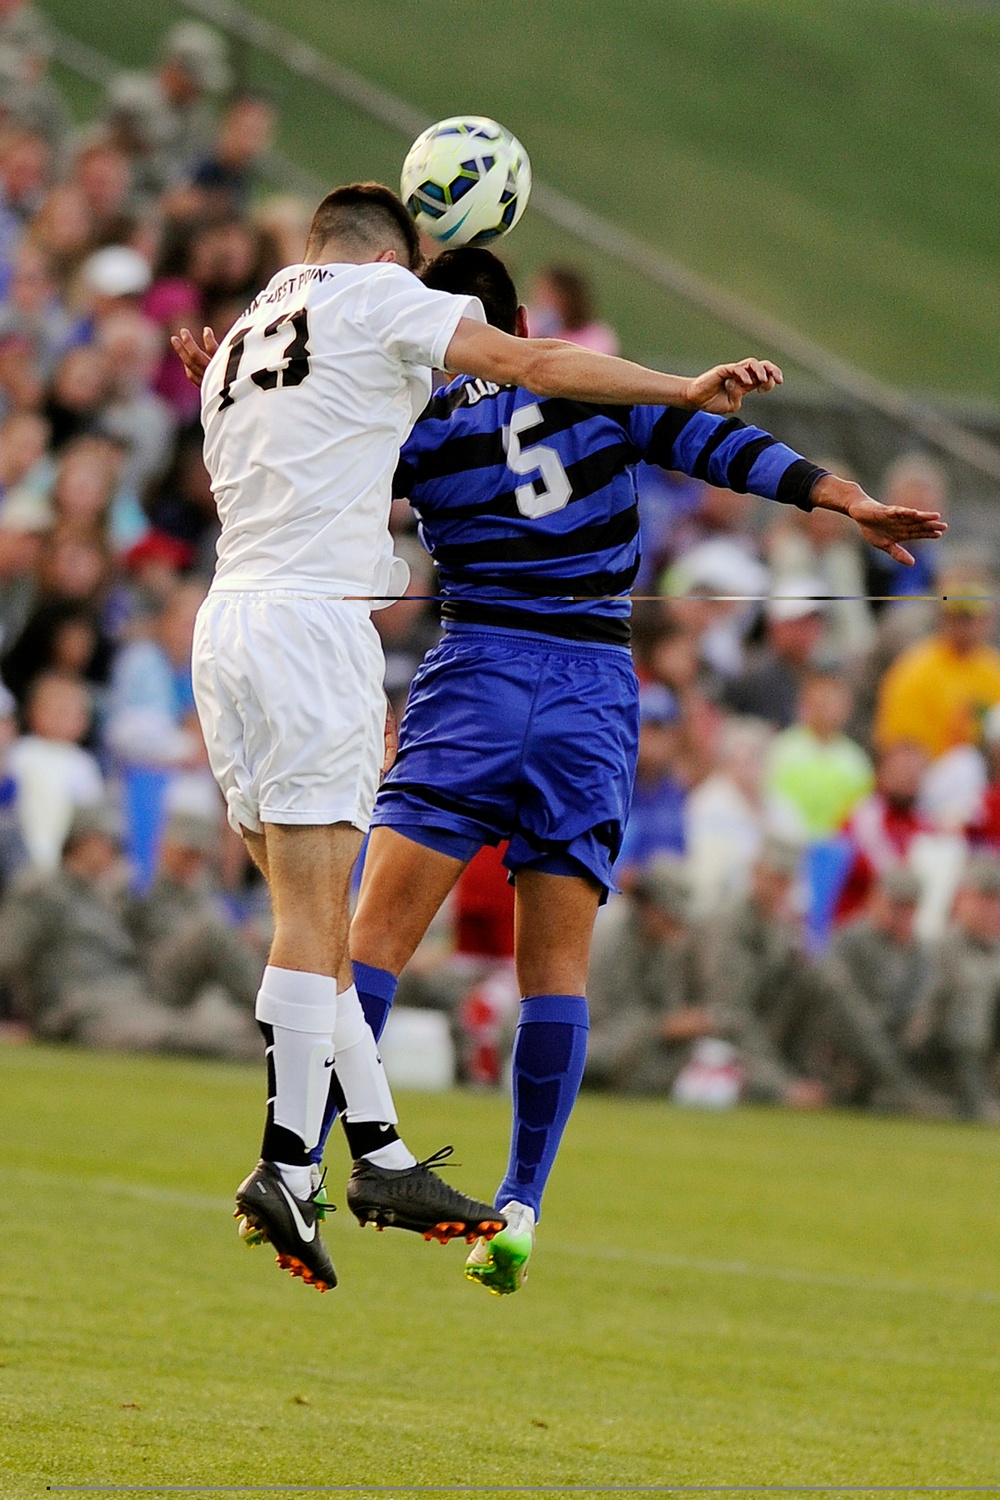 Air Force vs. Army Men's Soccer Aug 29, 2015